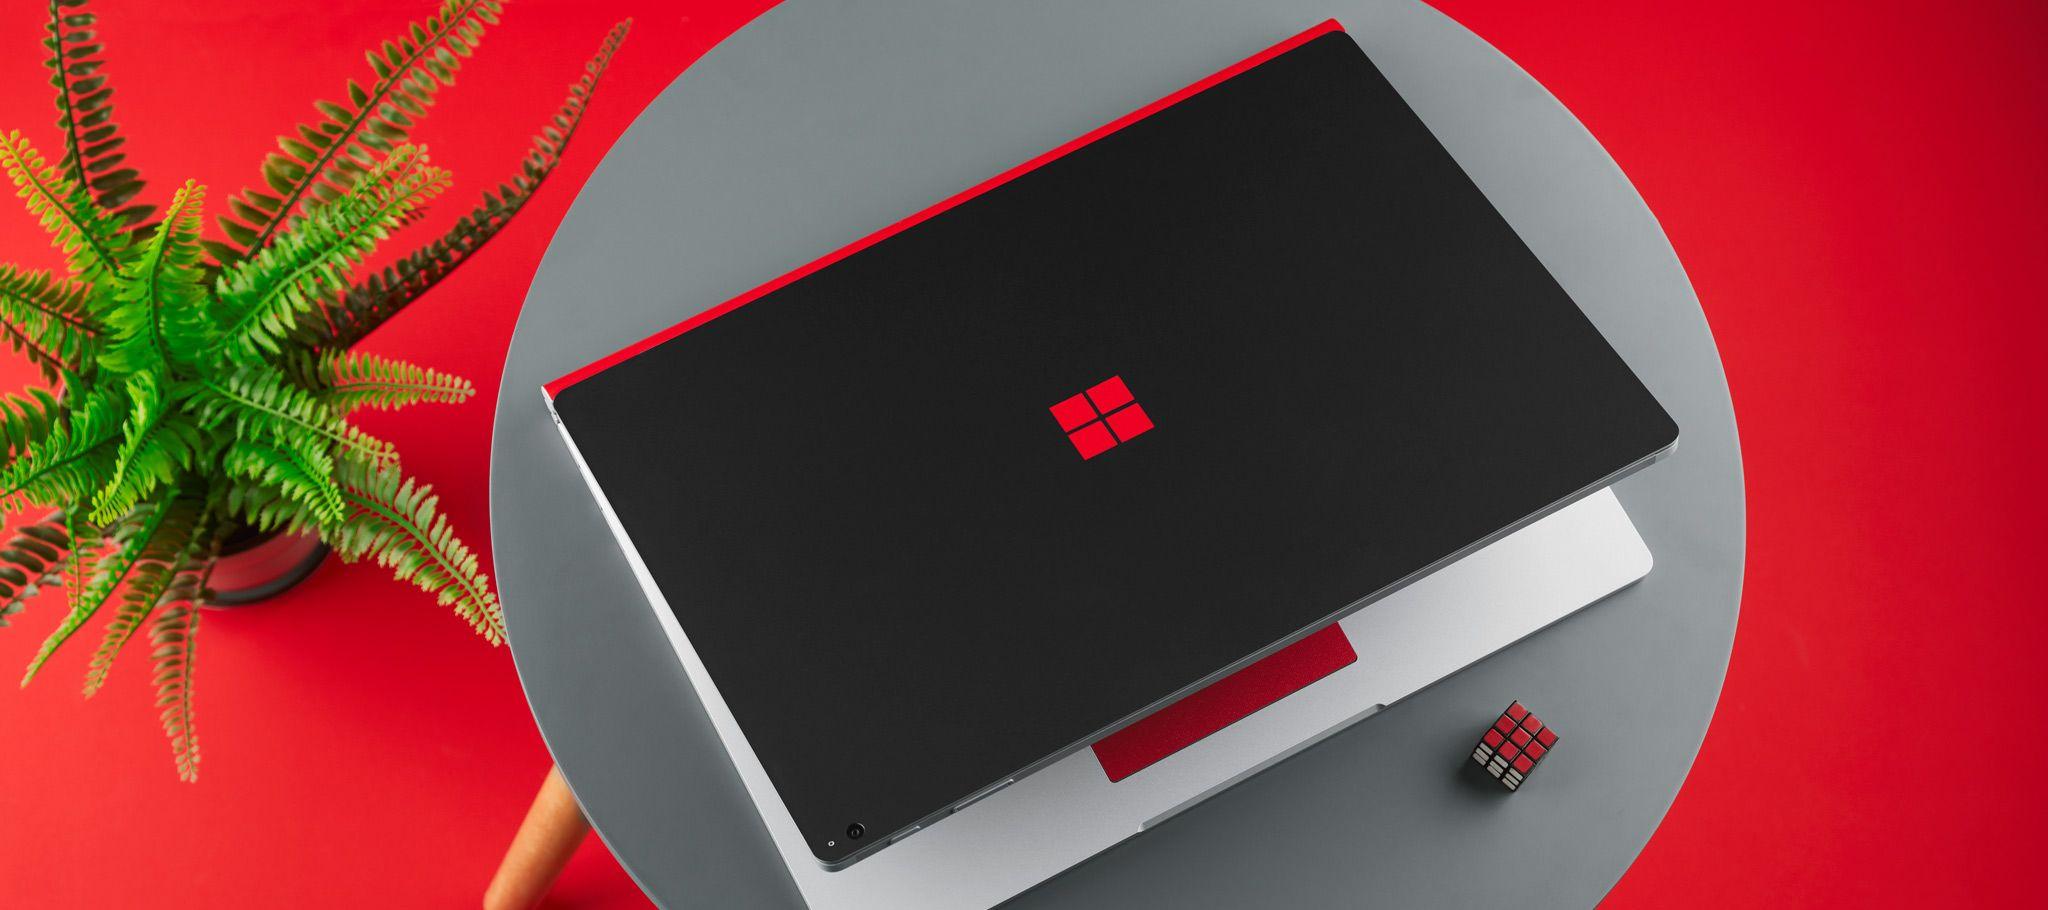 Red Square D Brand Logo - Surface Book Skins, Wraps & Covers dbrand